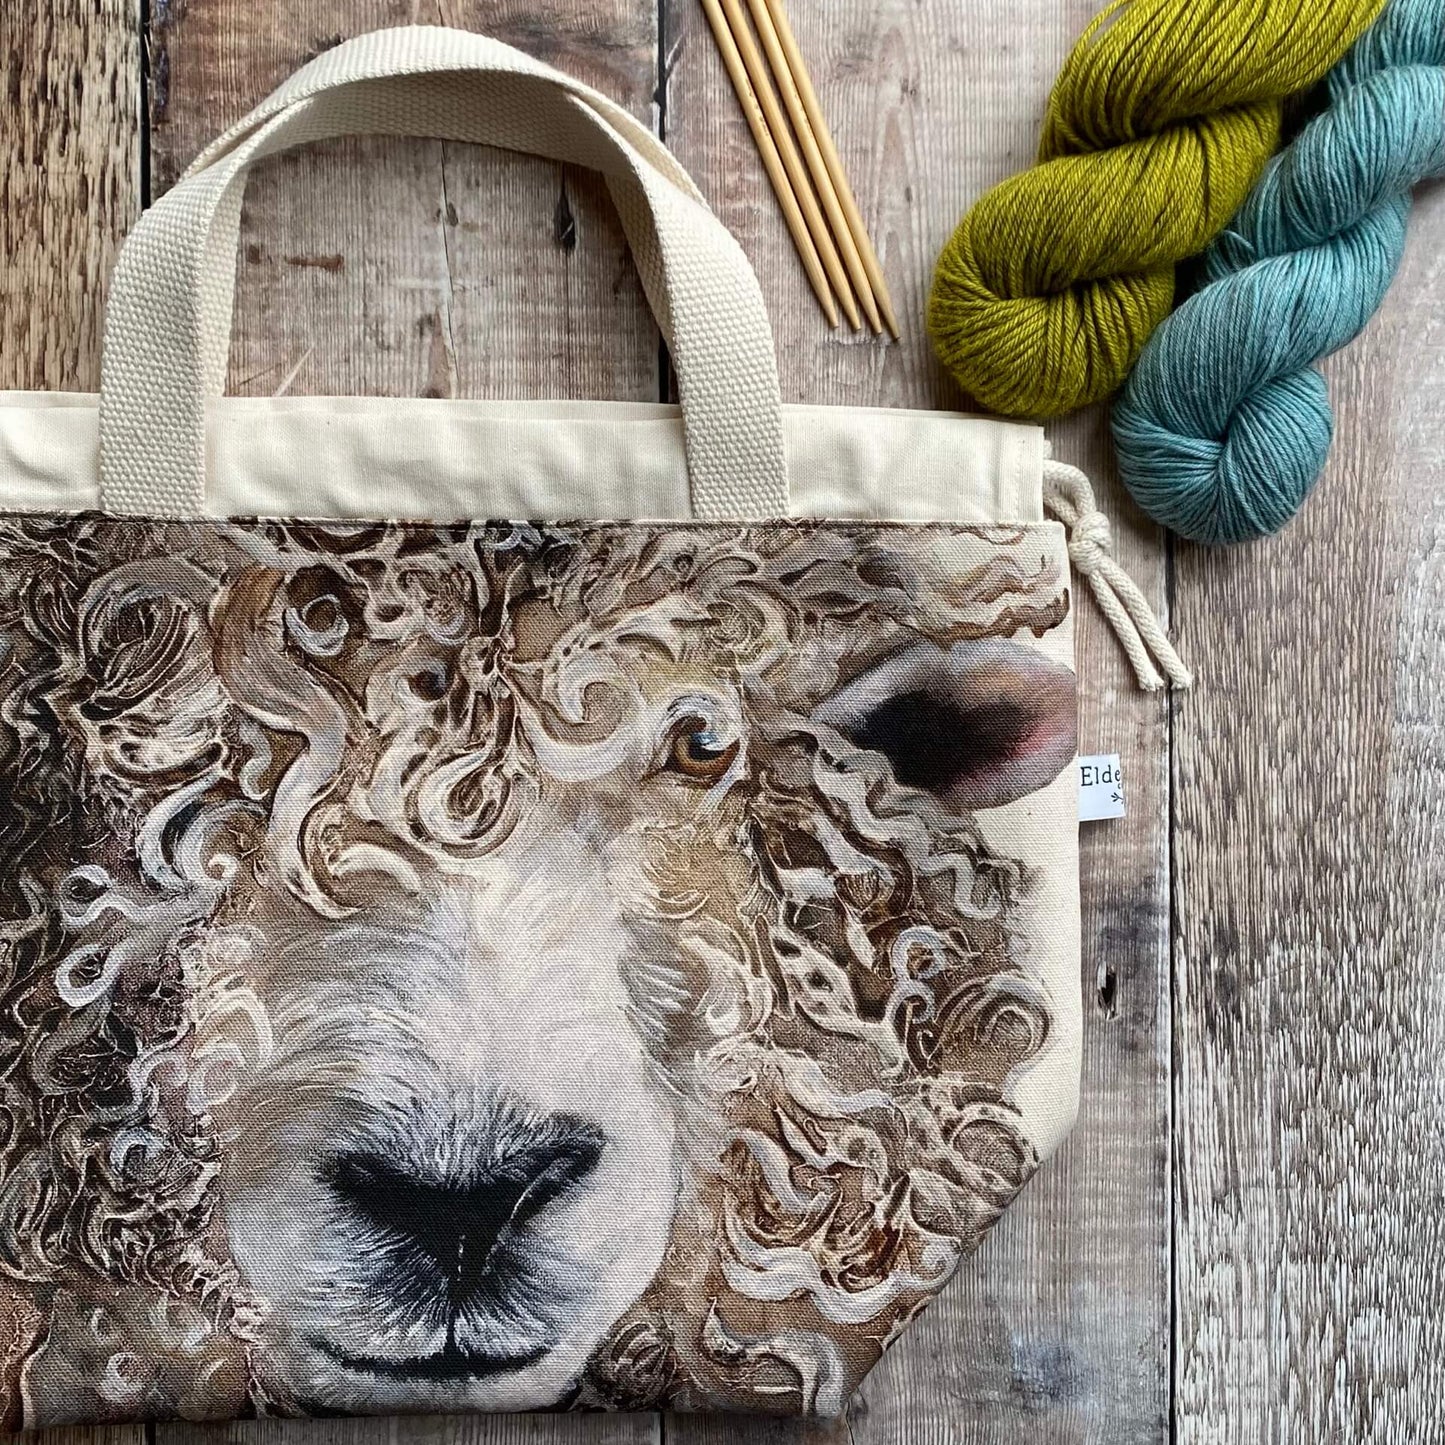 A large knitting project bag lies on a wooden table next to some yarn. From the bag fabric a large sheep face stares out. 